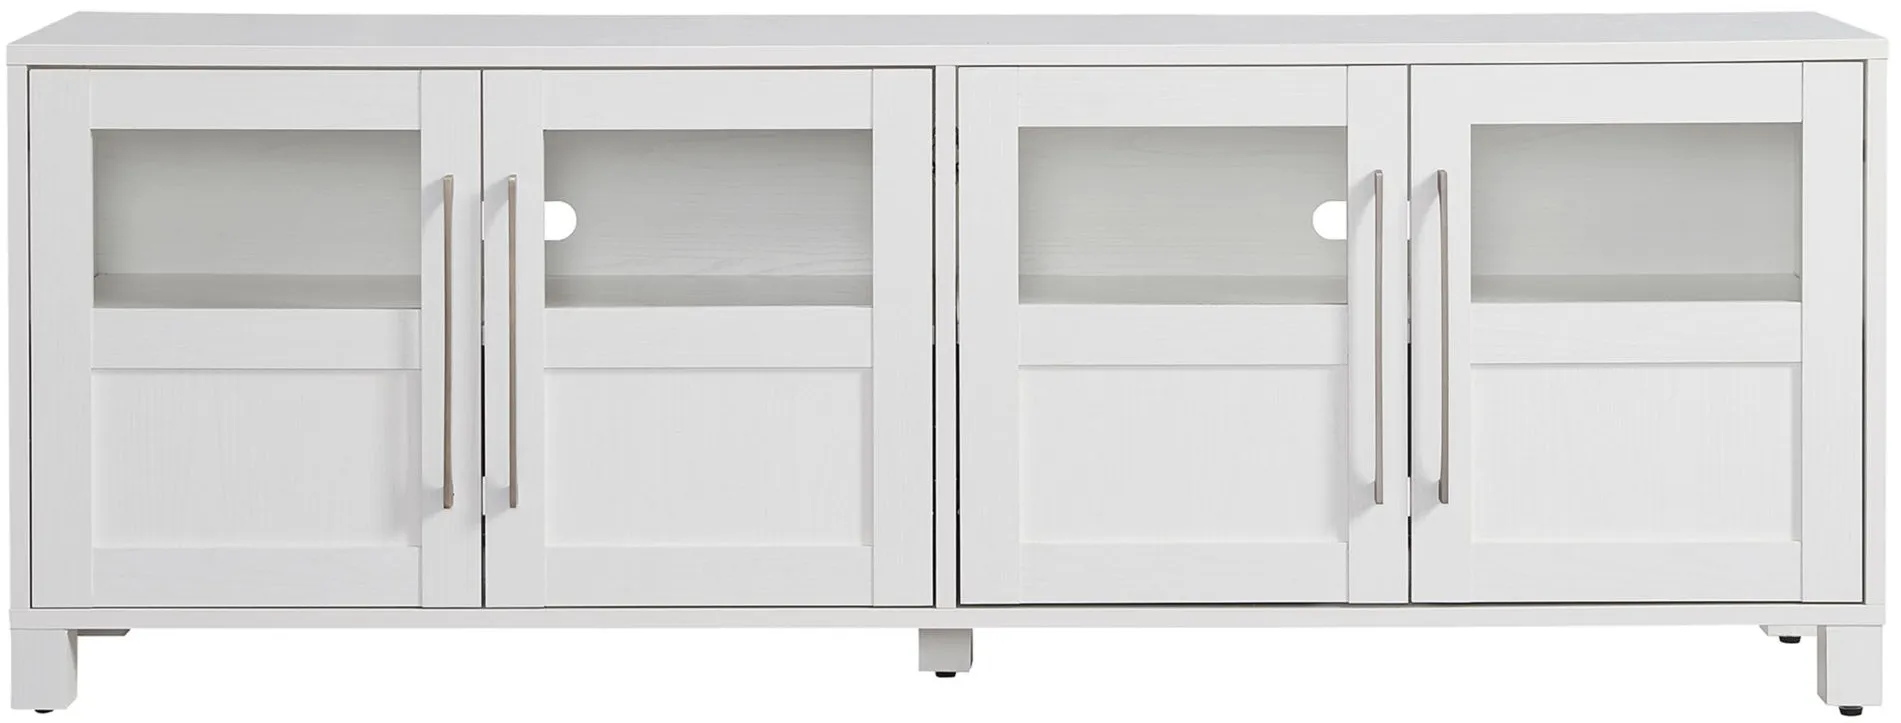 Sarmento TV Stand in White by Hudson & Canal